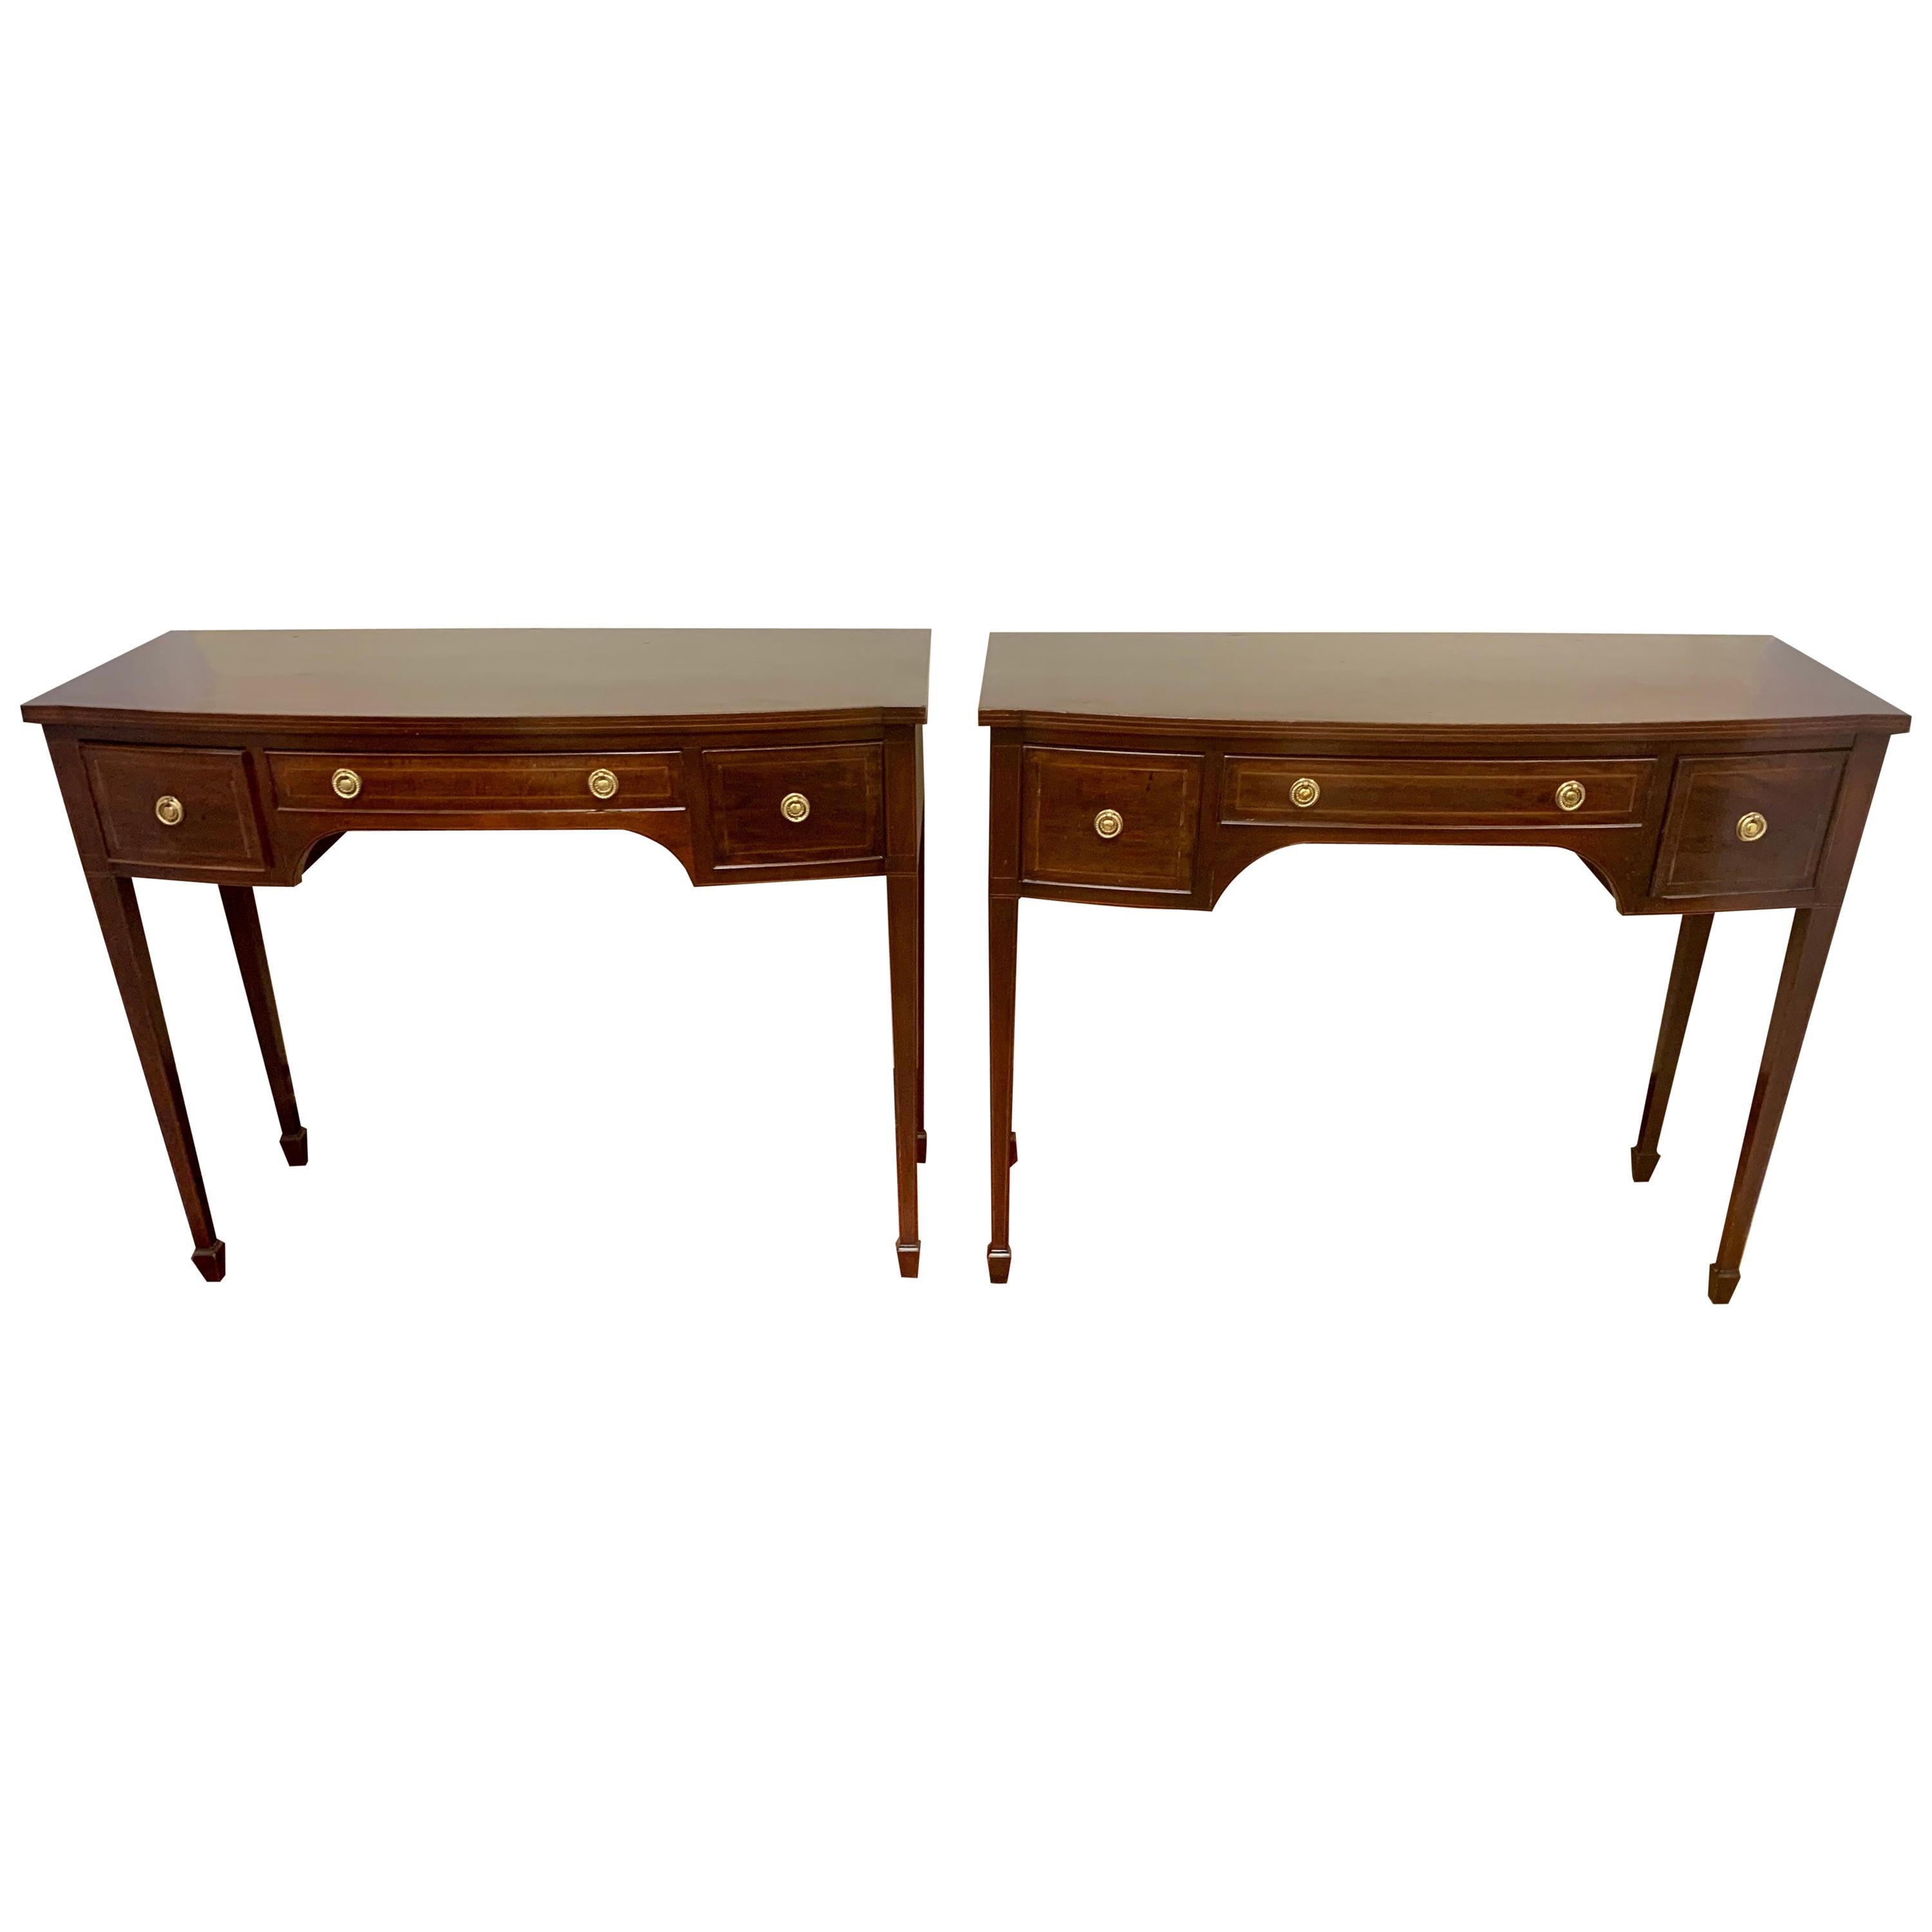 Pair of Federal Style Mahogany Console Tables